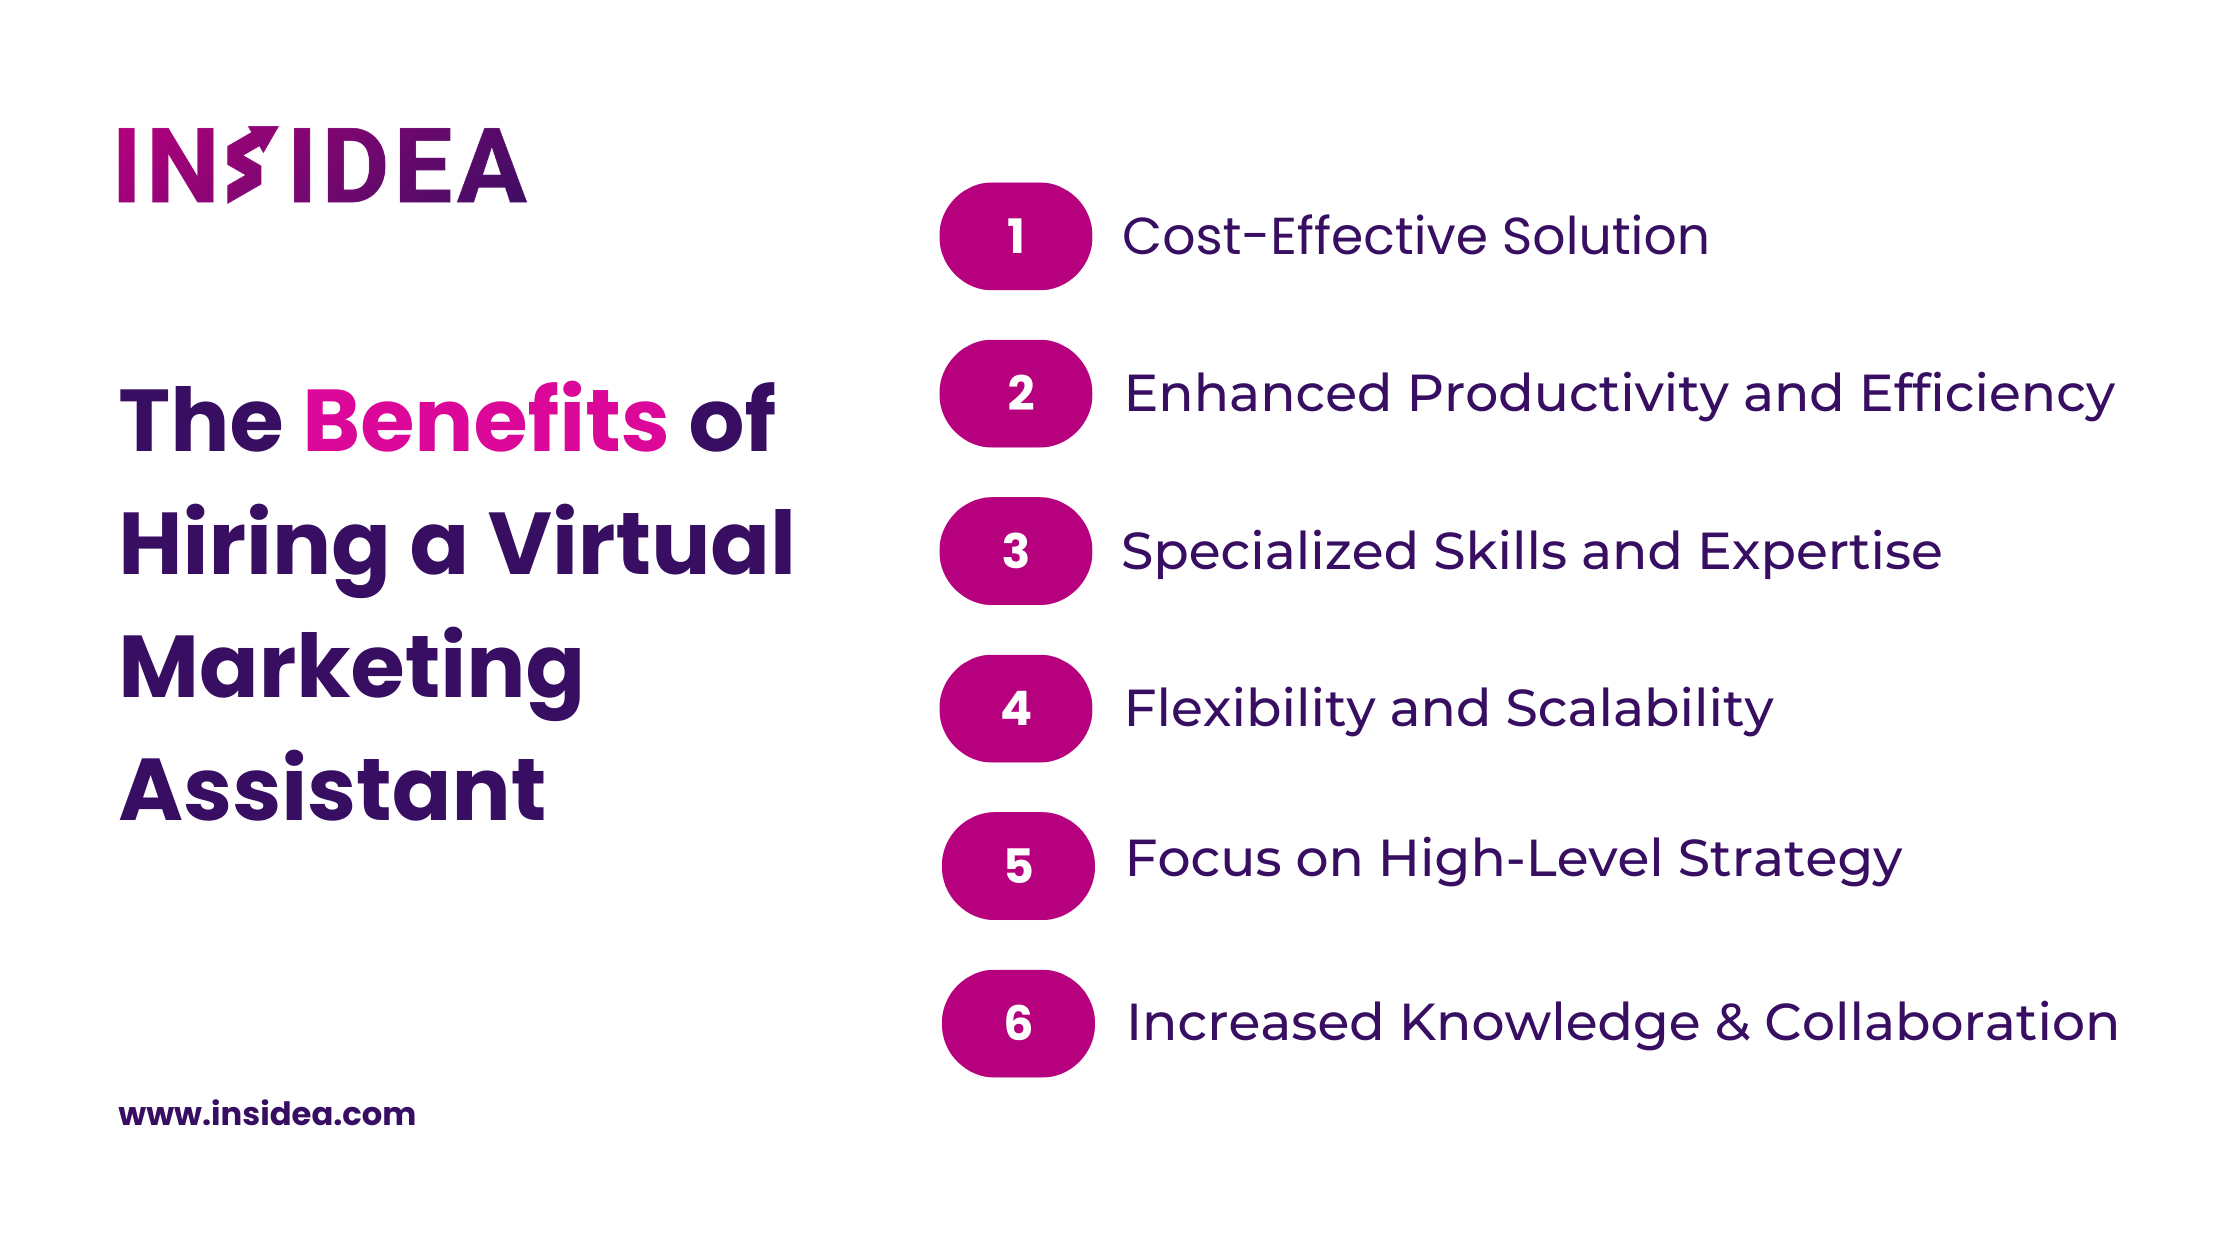 The Benefits of Hiring a Virtual Marketing Assistant